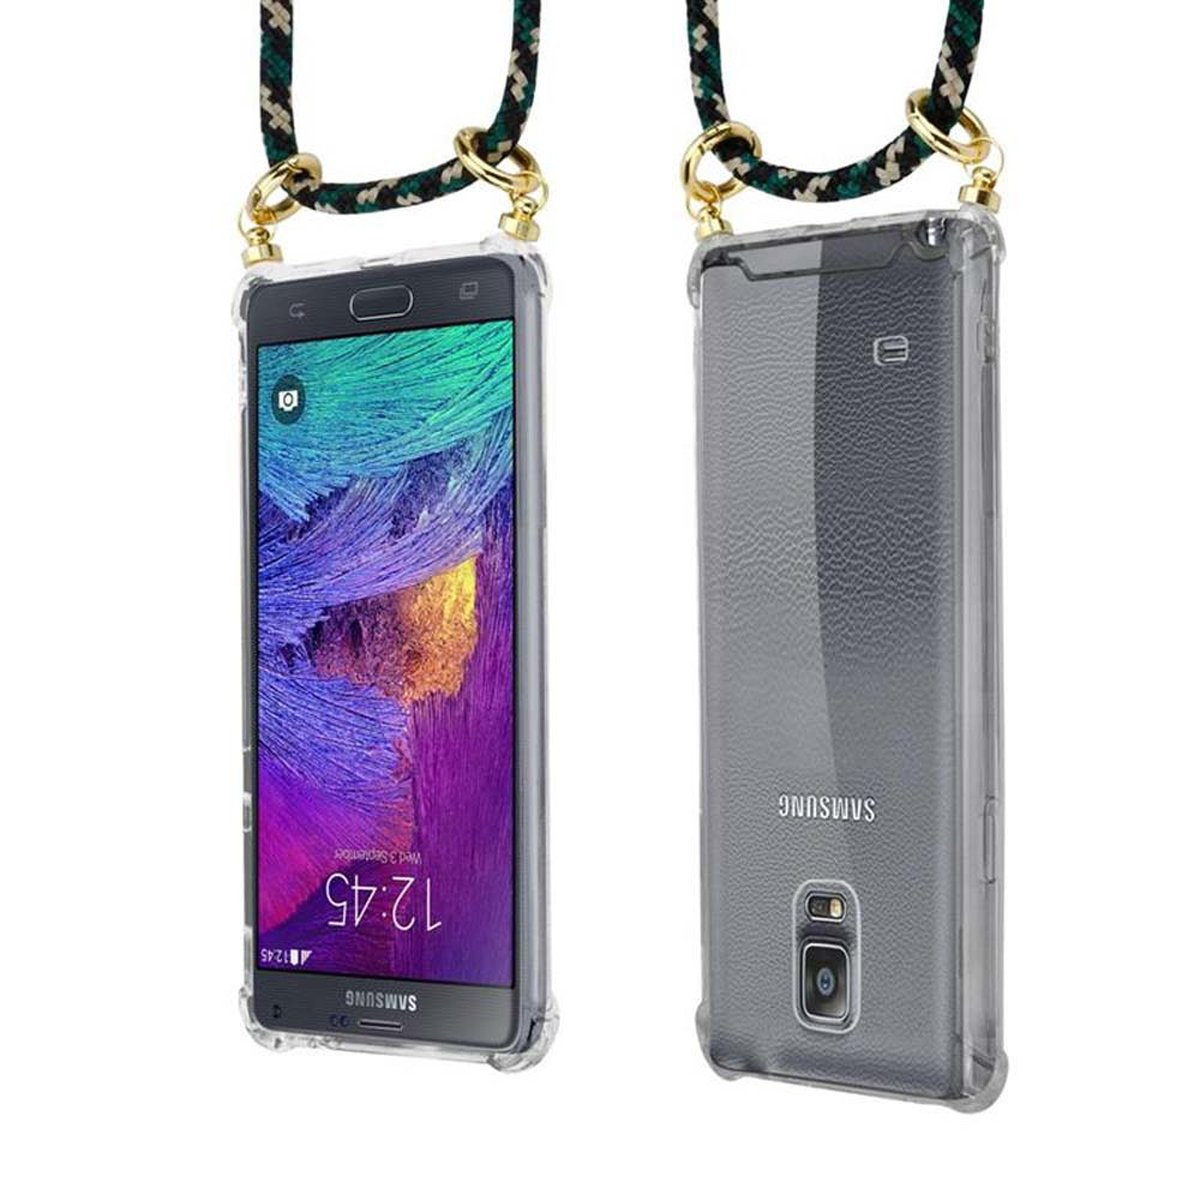 CADORABO Handy CAMOUFLAGE Samsung, mit Kordel 4, Kette abnehmbarer NOTE Gold und Ringen, Galaxy Band Backcover, Hülle